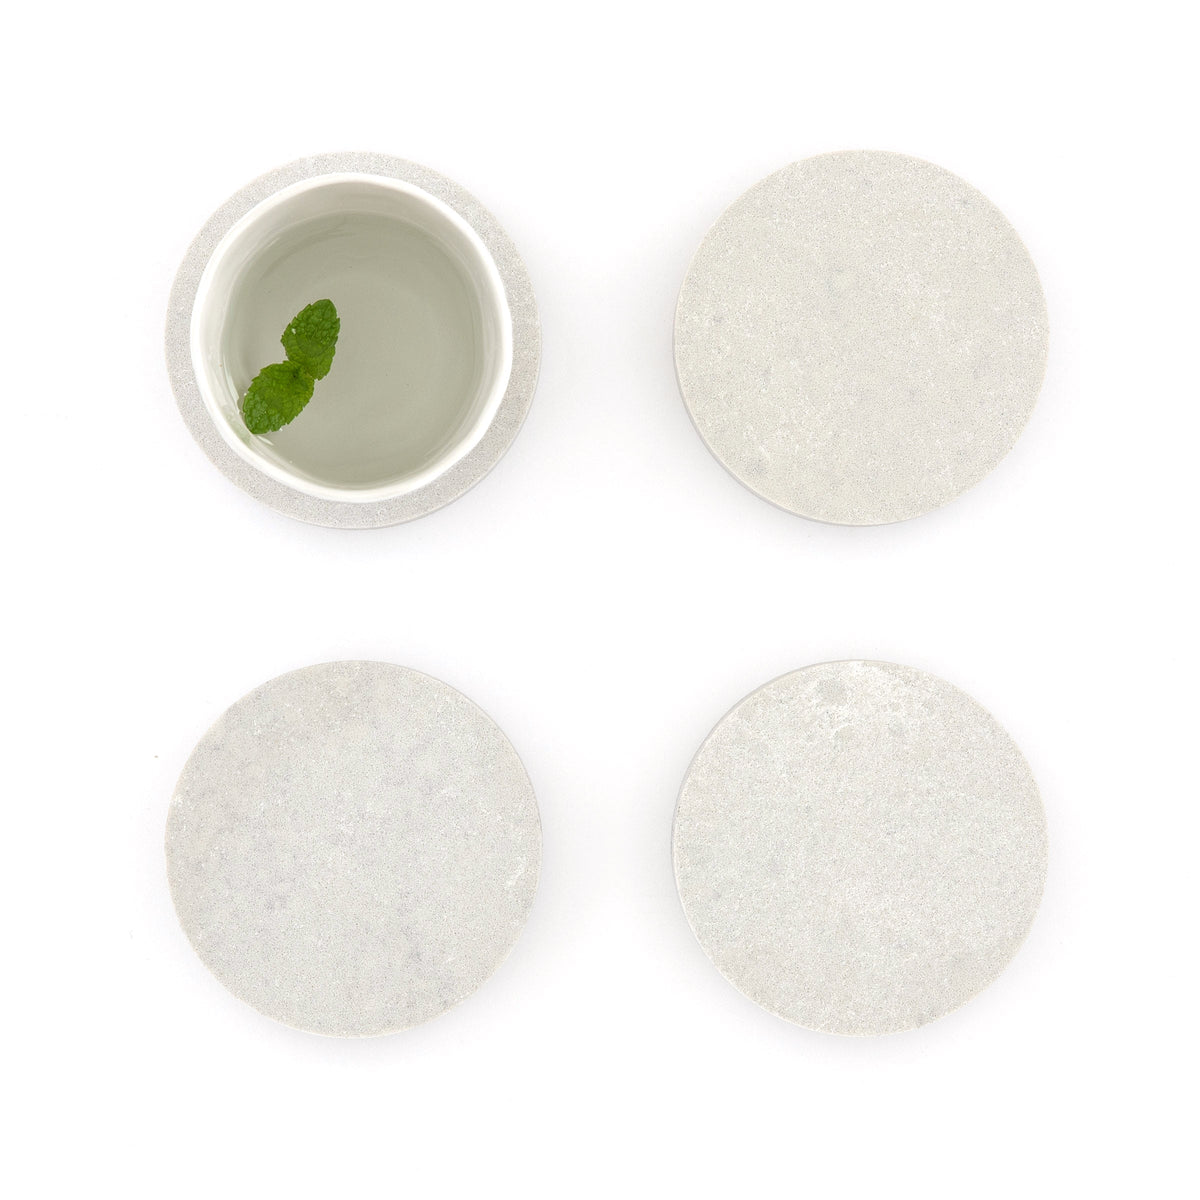 Round quartz coasters in Caesarstone Airy Concrete™ created by Aureliia Collection. Similar to a marble, the Round Quartz Coasters shown with glass of water, featuring mint leaf. An excellent home decor gift for someone who has it all.